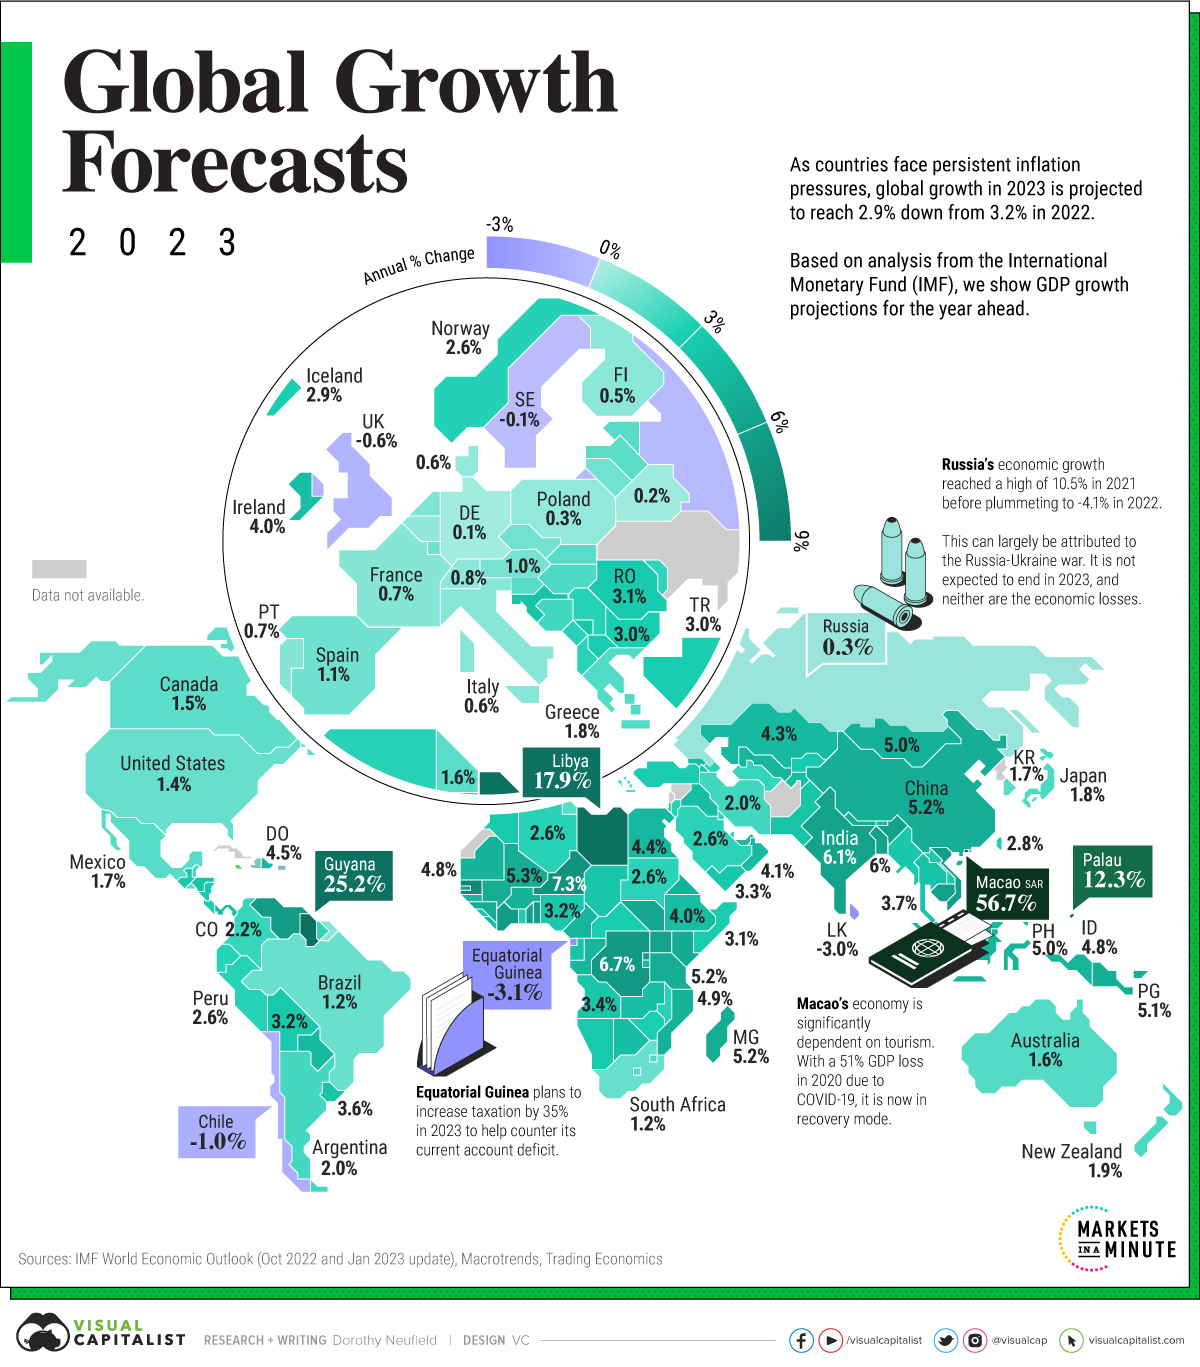 Mapped: GDP Growth Forecasts by Country, in 2023